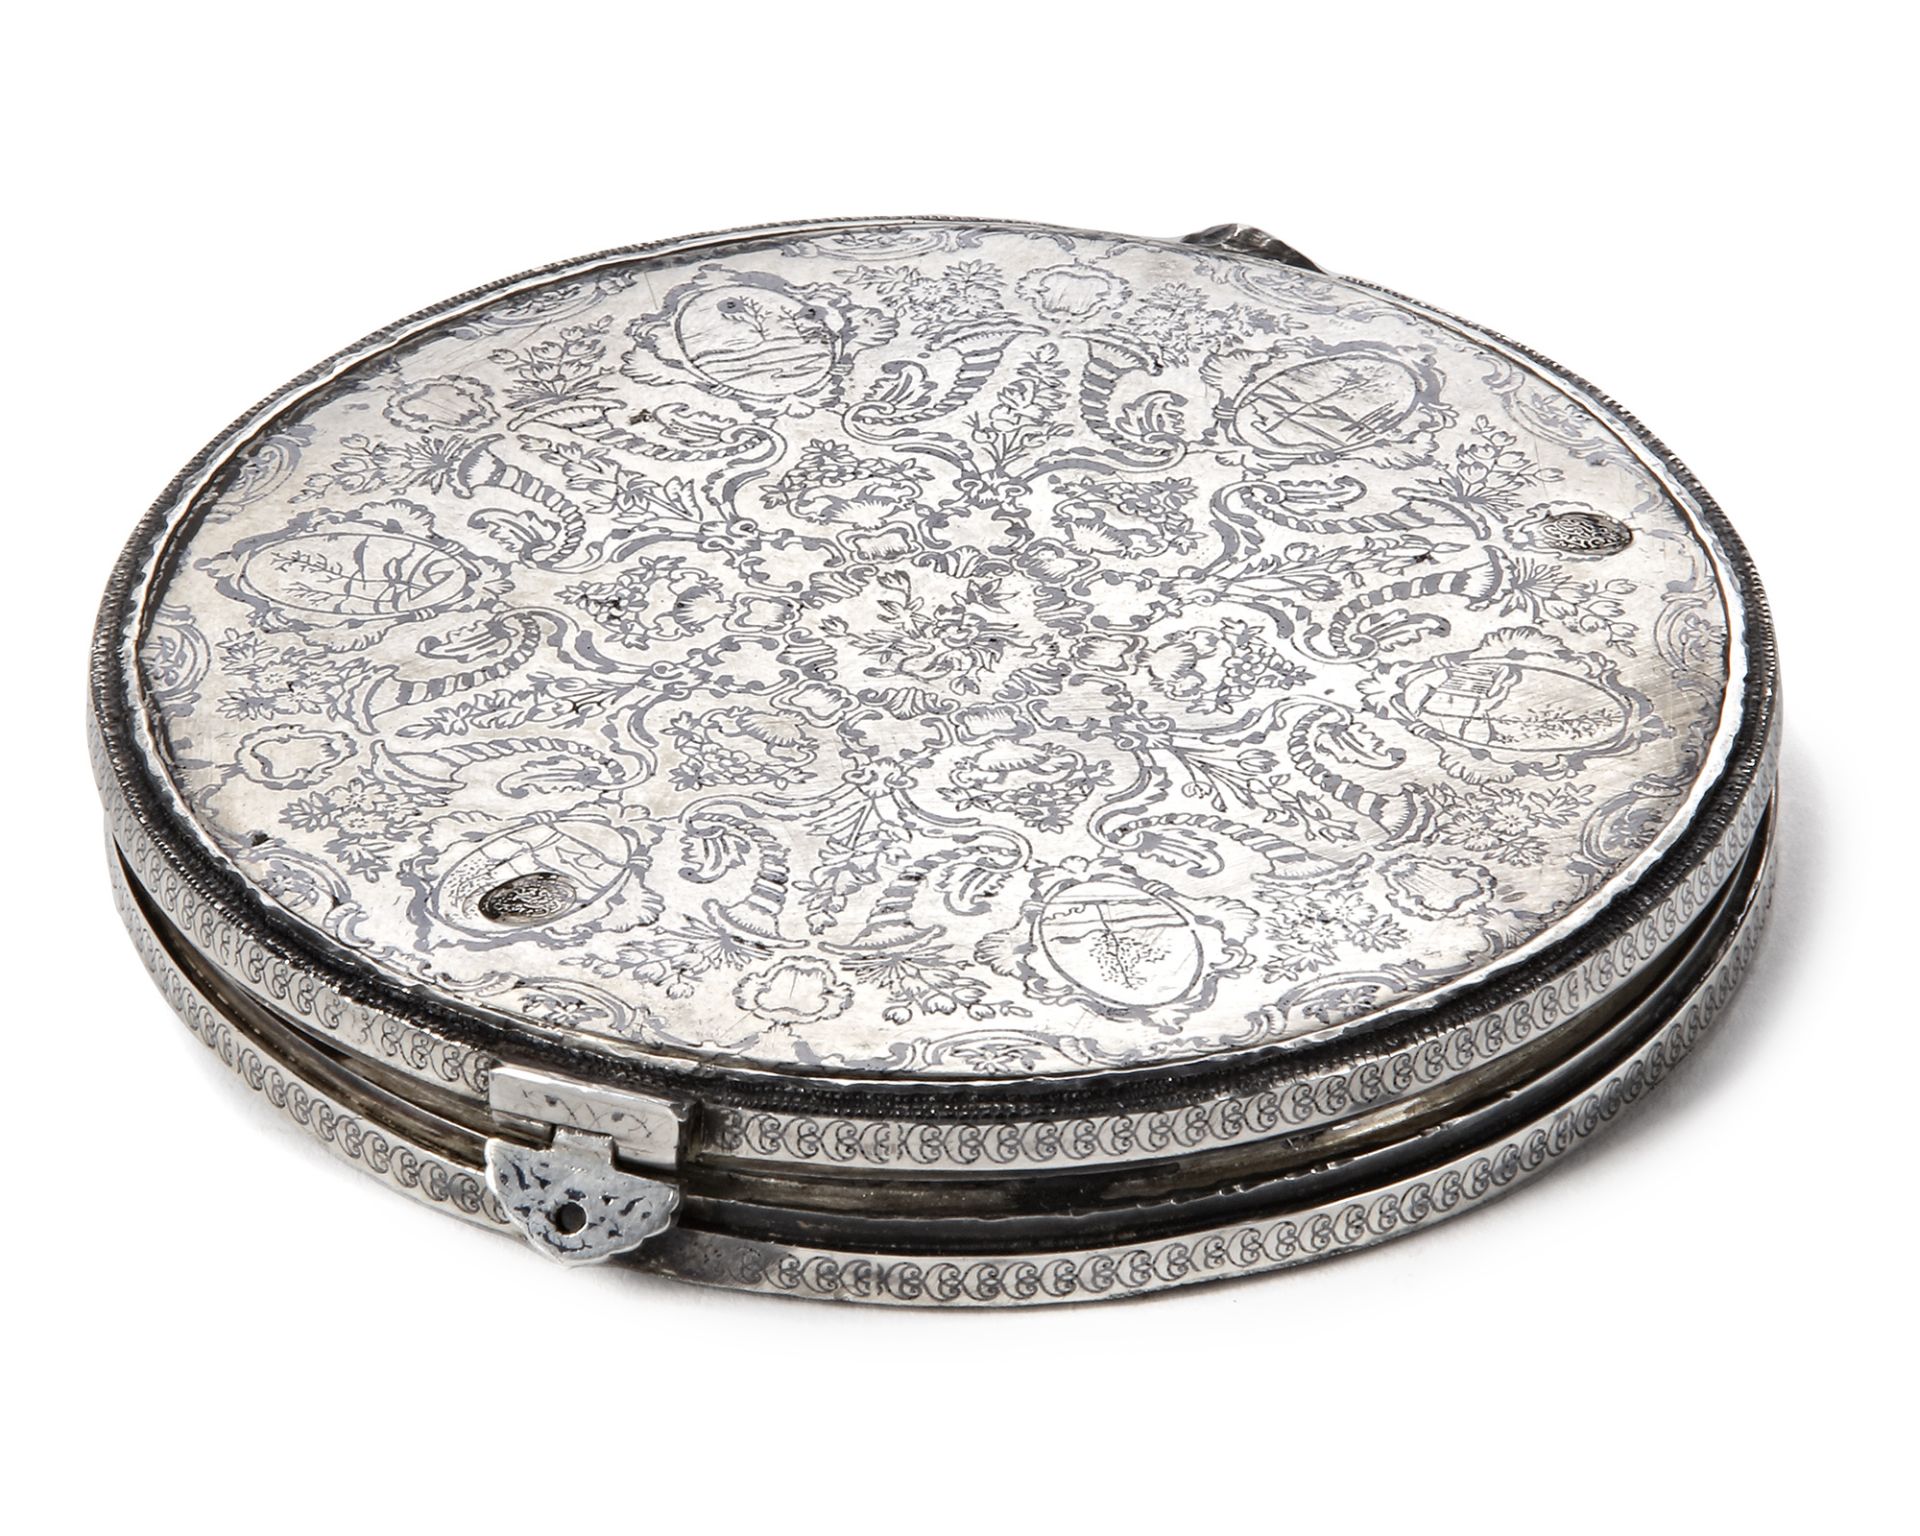 A SILVER PORTABLE FOLDABLE OTTOMAN QIBLA FINDER WITH COMPASS AND DOUBLE SUNDIAL, 19TH CENTURY - Image 2 of 7